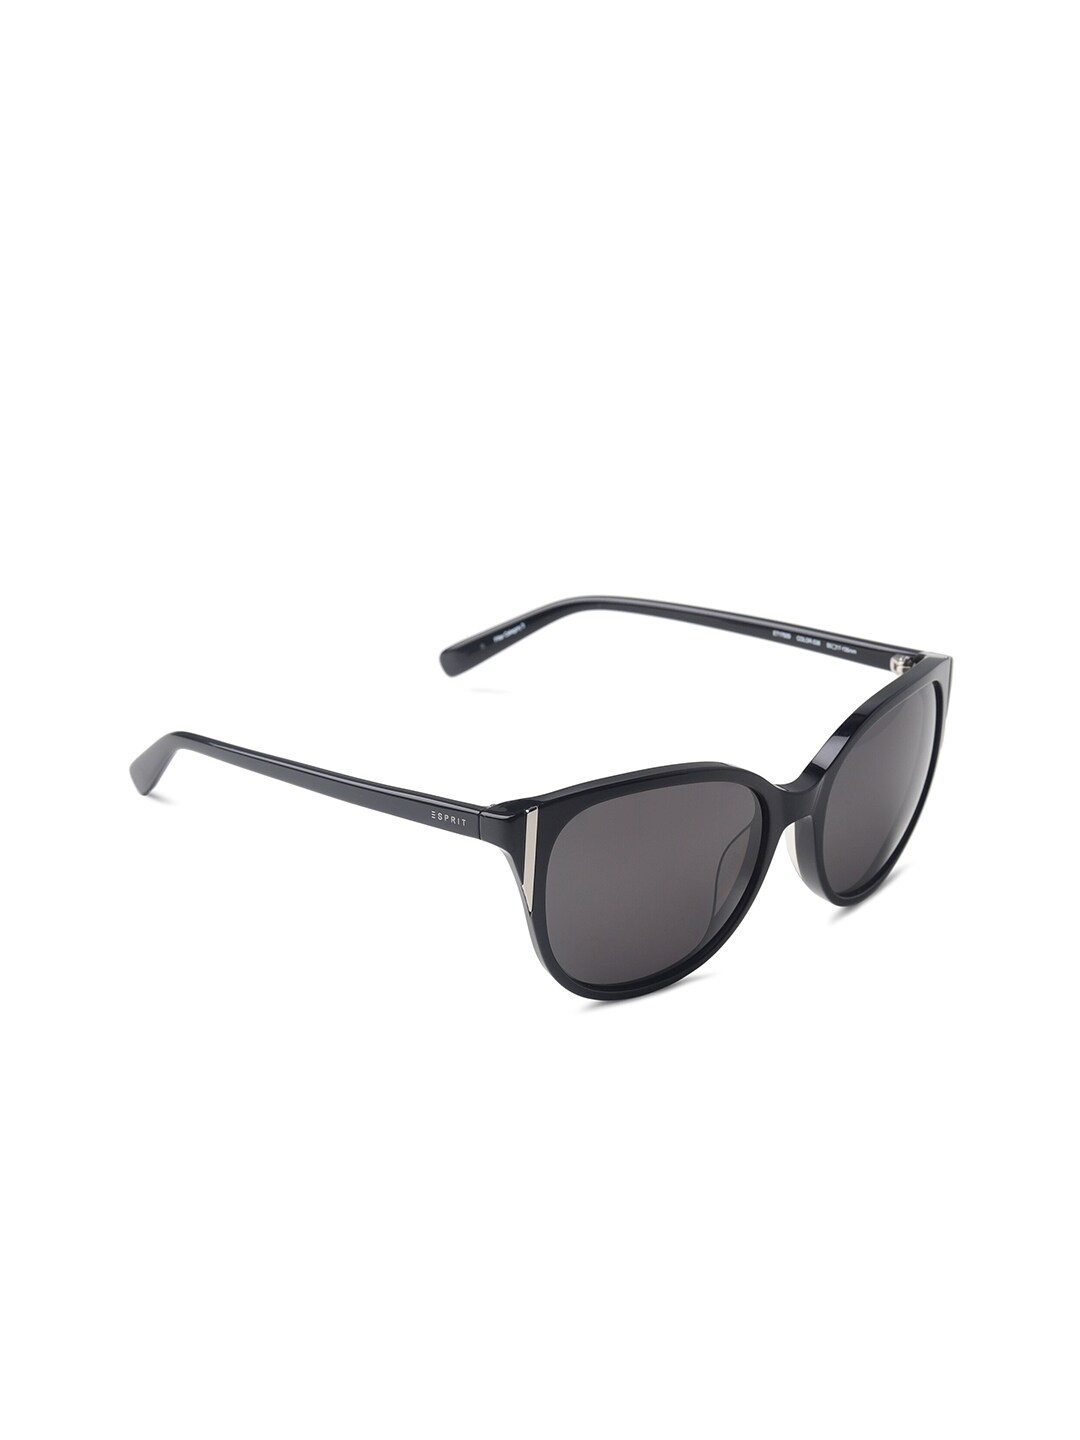 ESPRIT Women Grey Lens & Black Other Sunglasses with UV Protected Lens Price in India